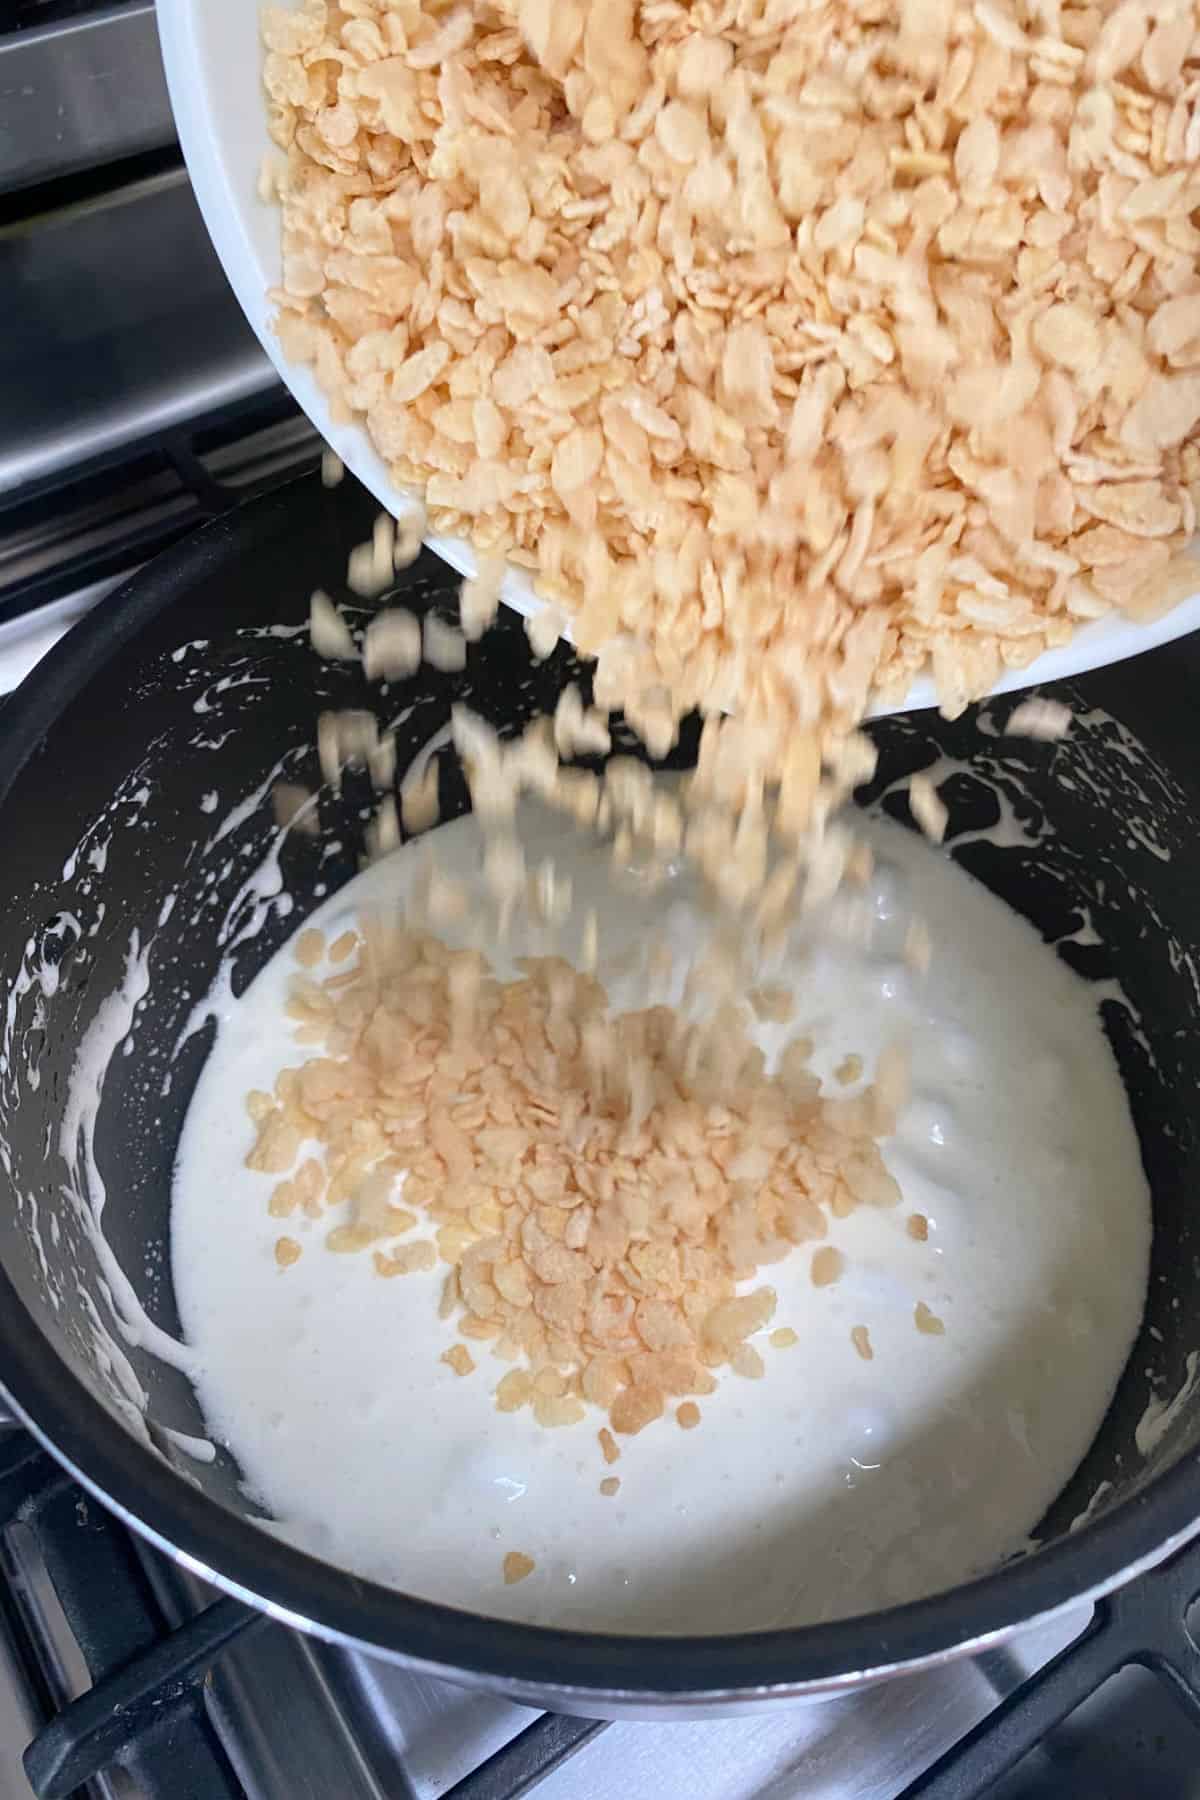 How to Make Strawberry Rice Krispie Treats step 2 adding rice cereal to pan.